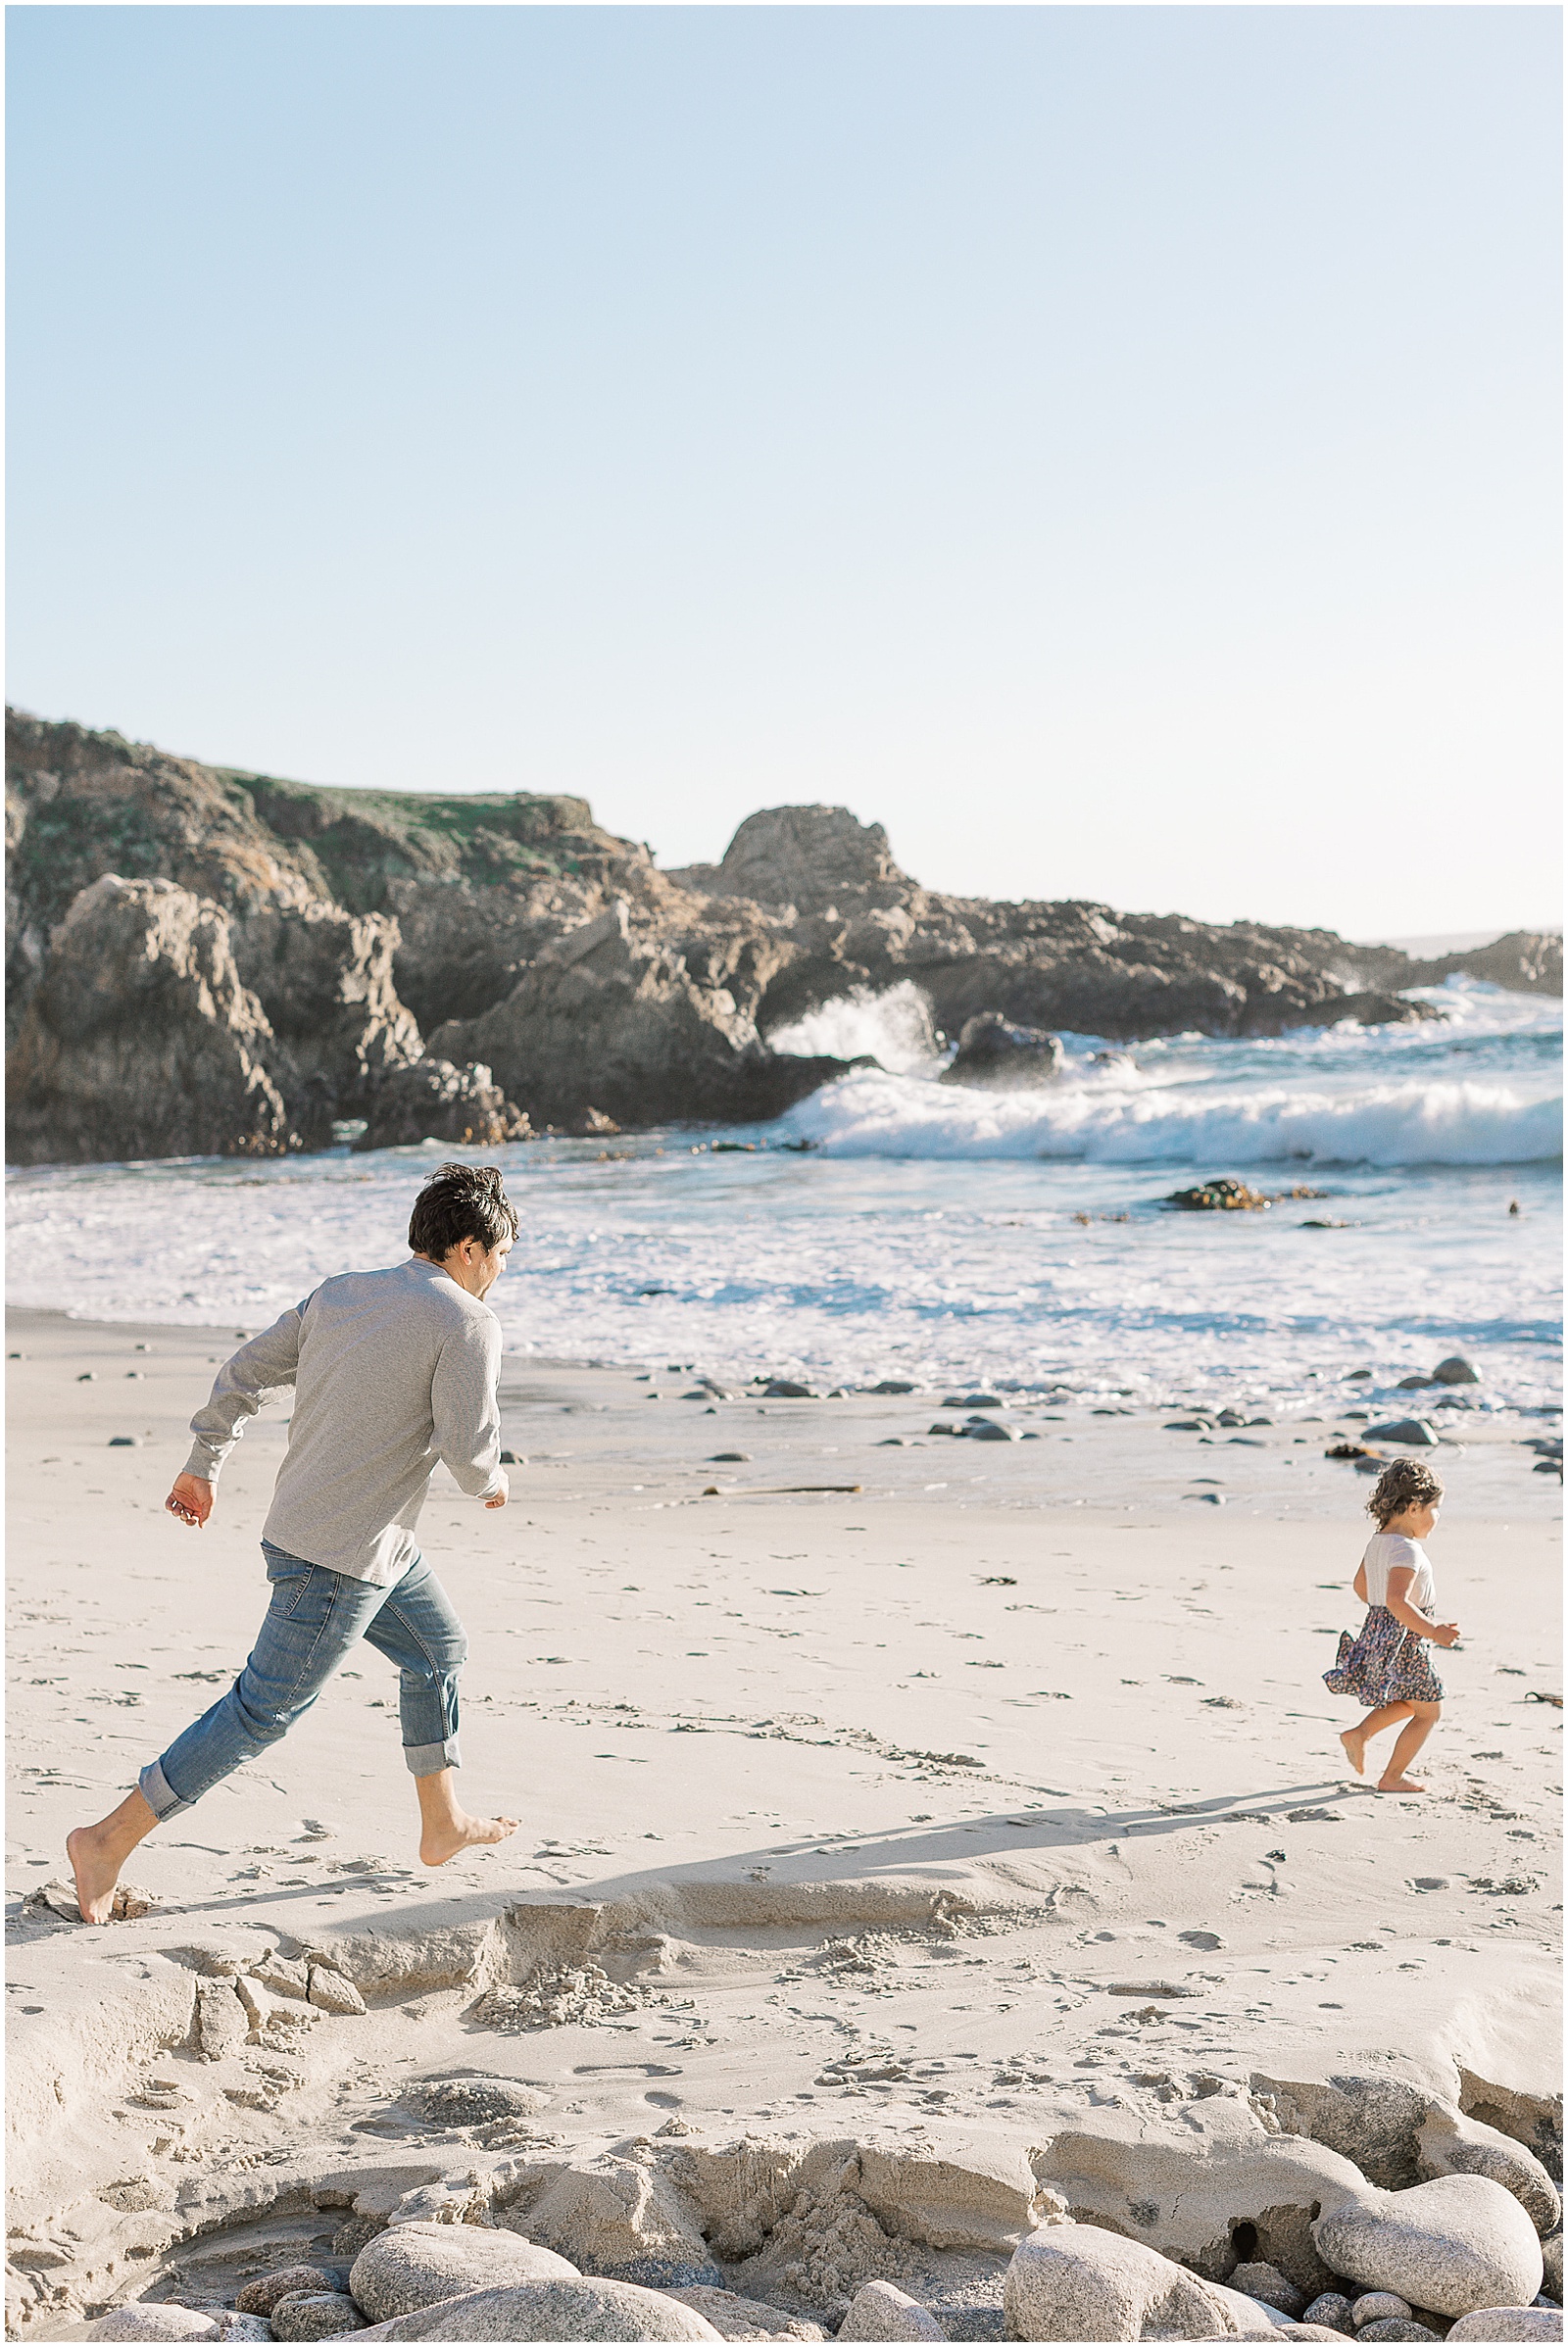 a portrait of a father chasing his child along the beach